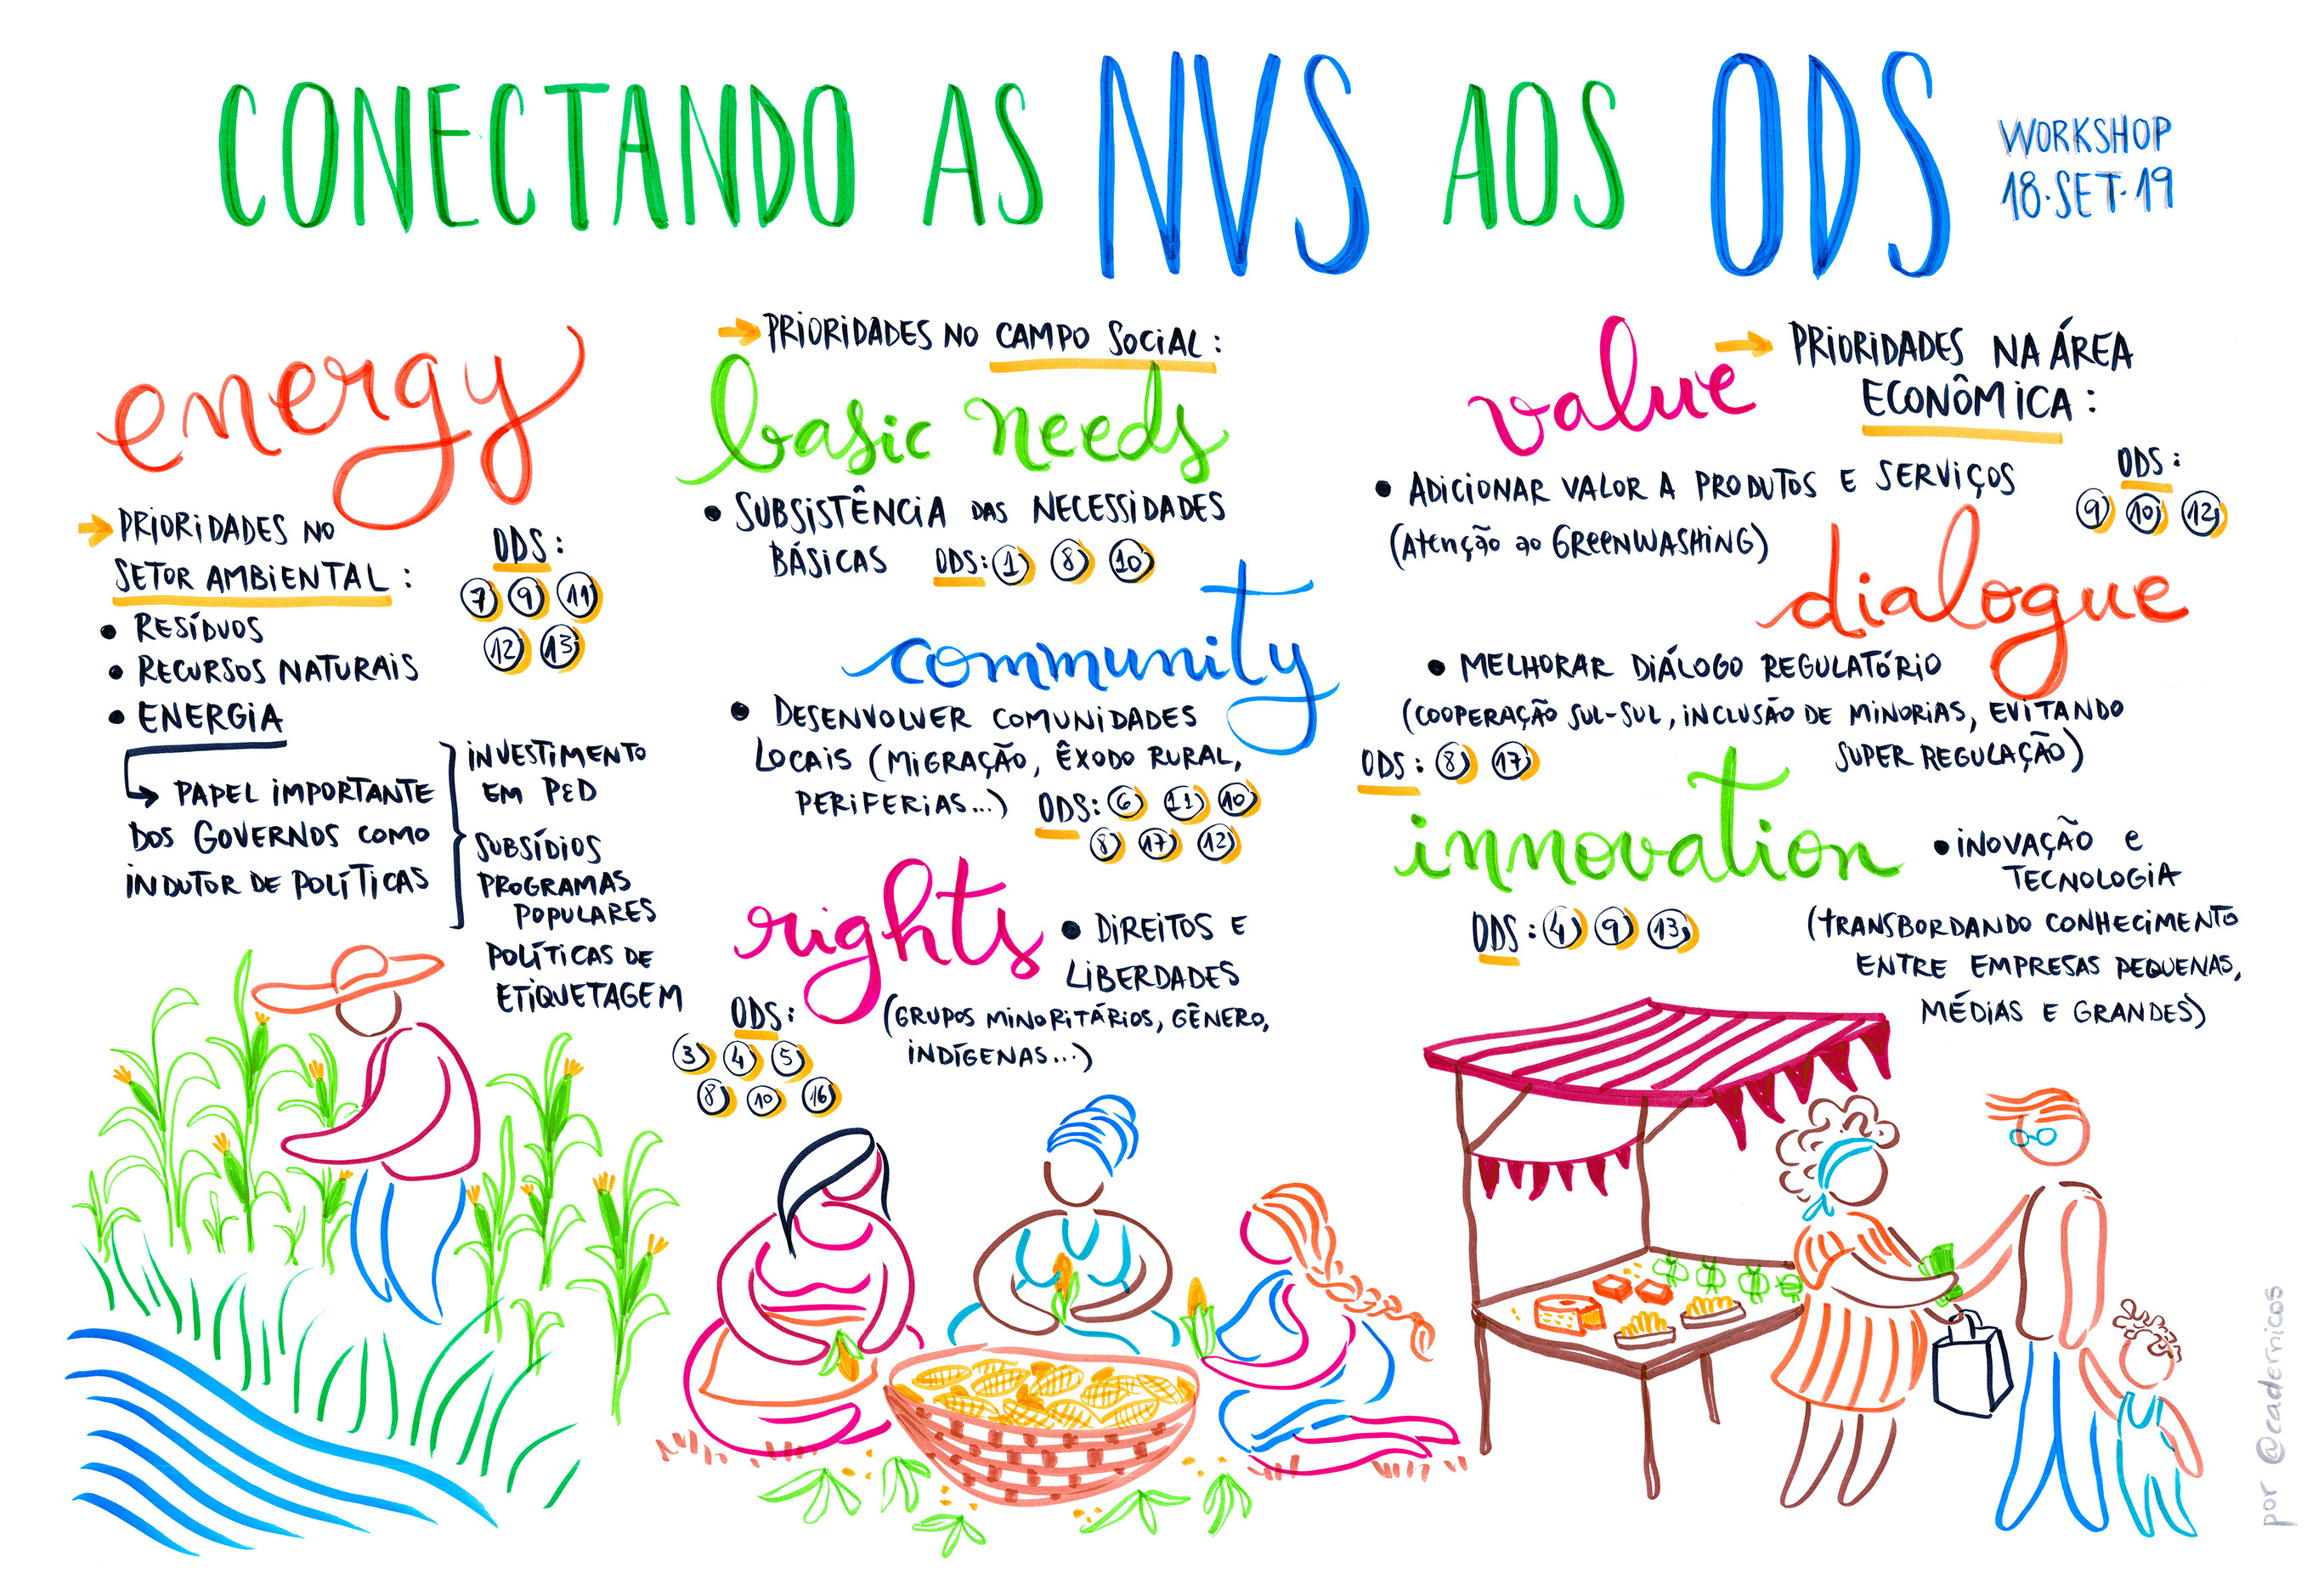 painel 8 - nvs aos ods